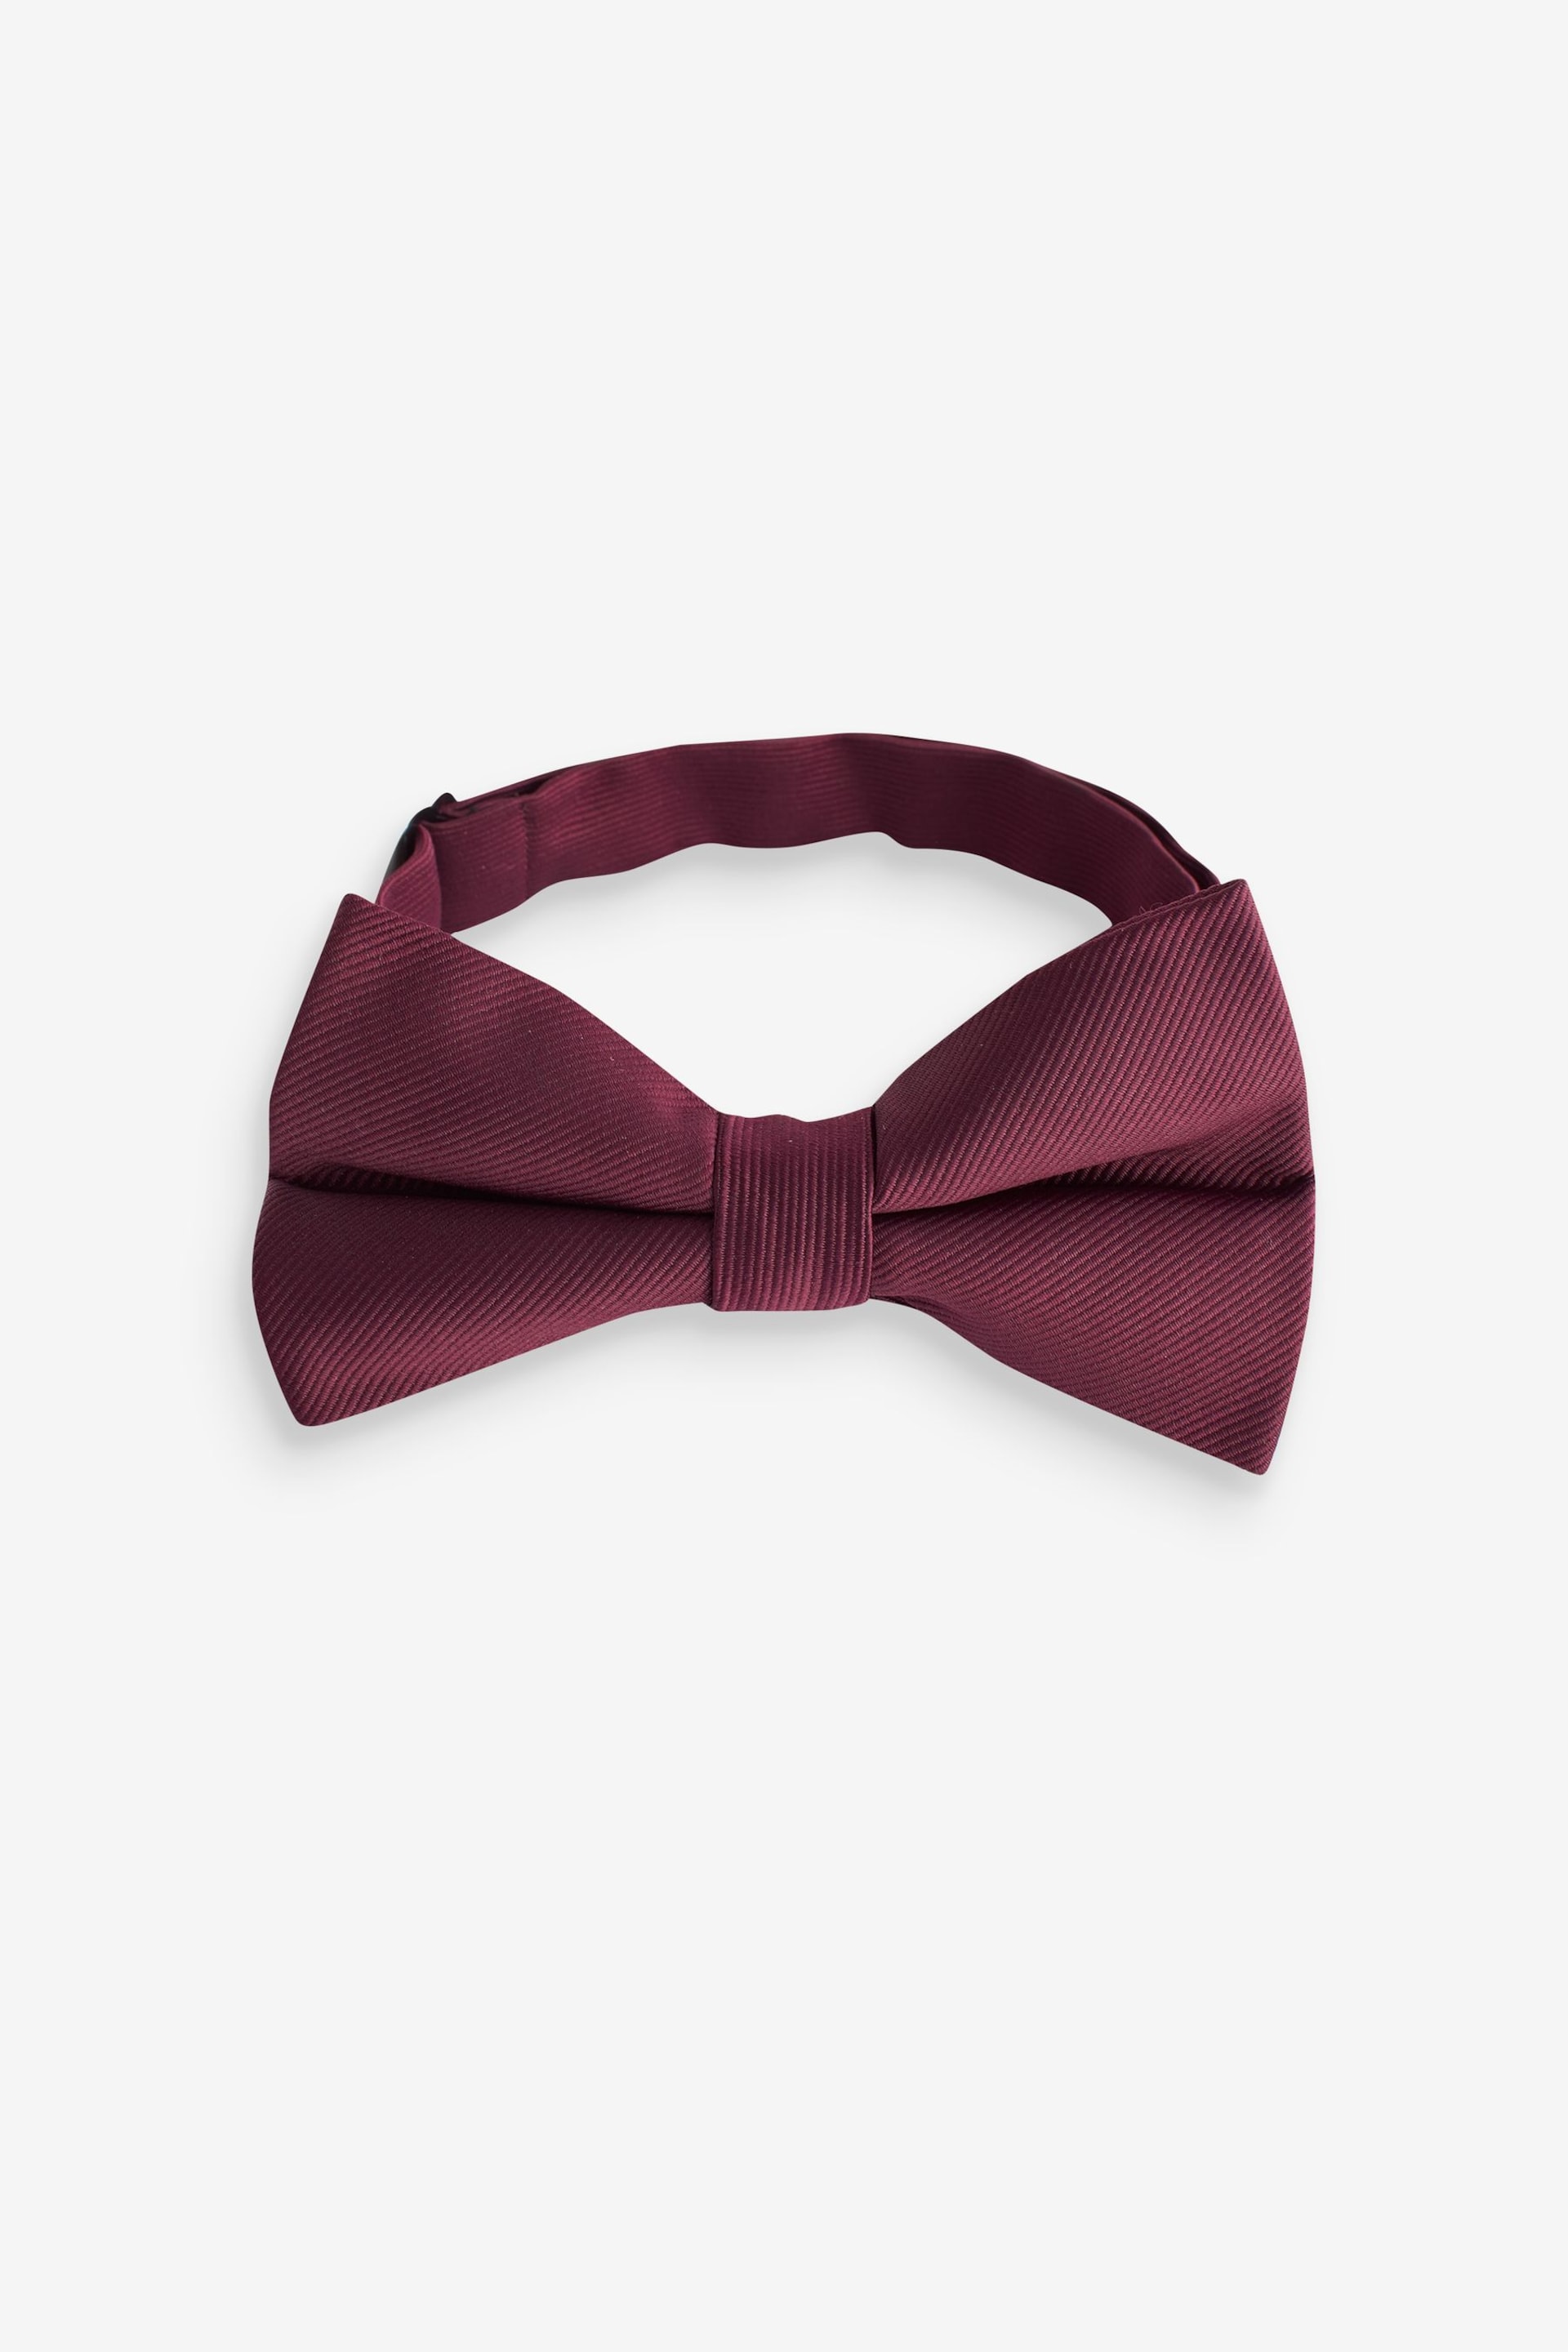 Burgundy Red Recycled Polyester Twill Bow Tie - Image 3 of 7